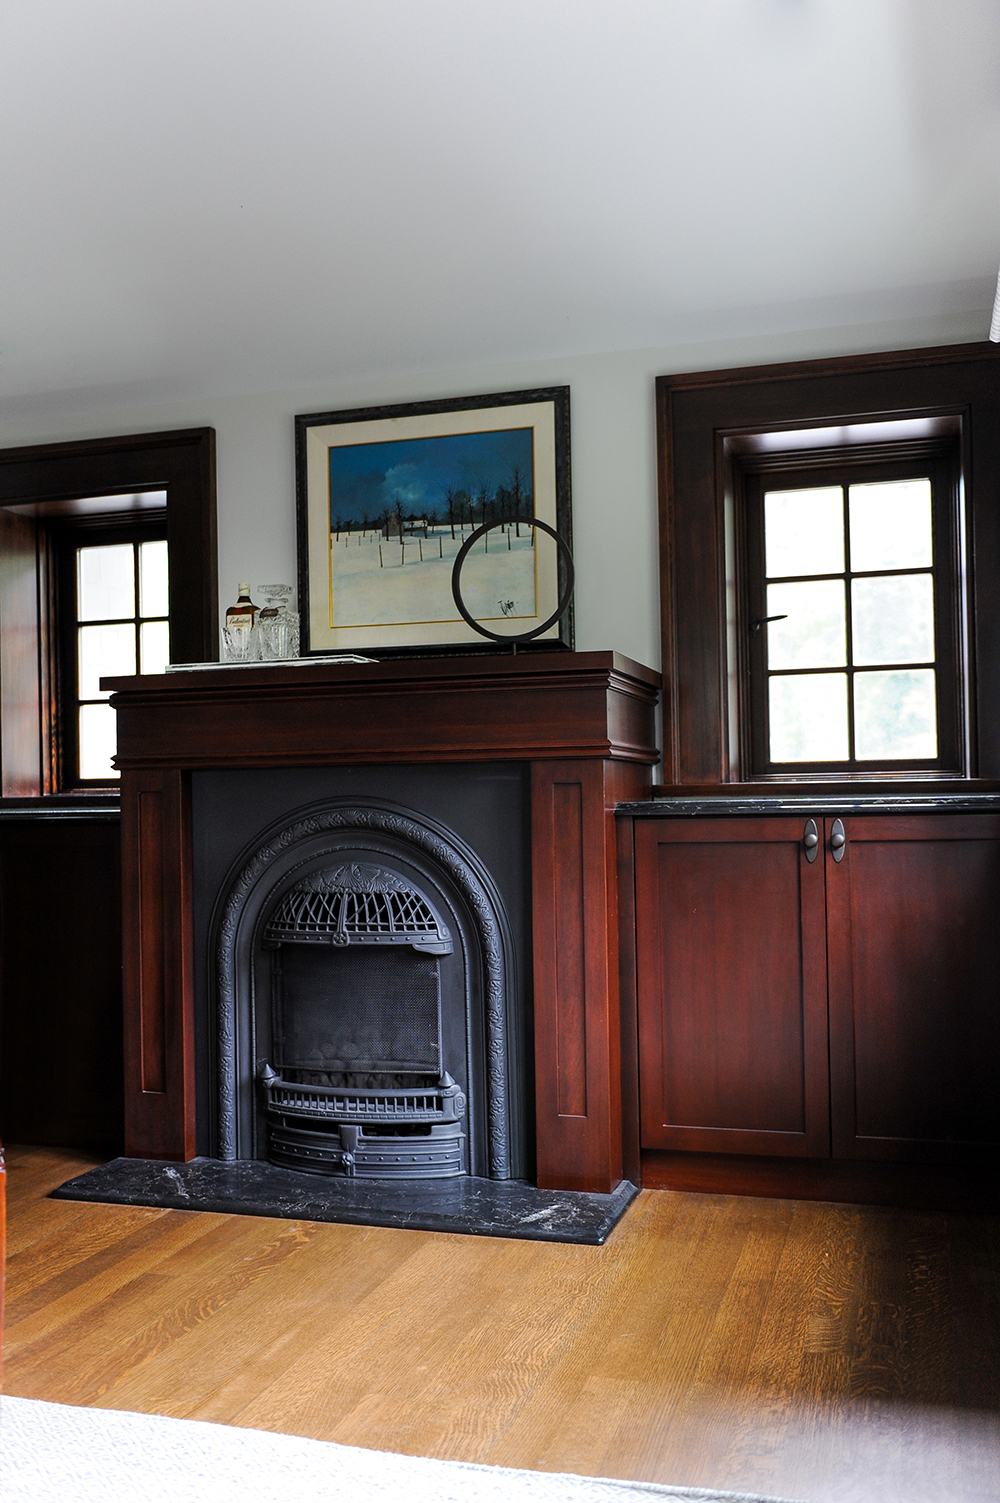 This working fireplace distinguishes the residence as a true heritage home.